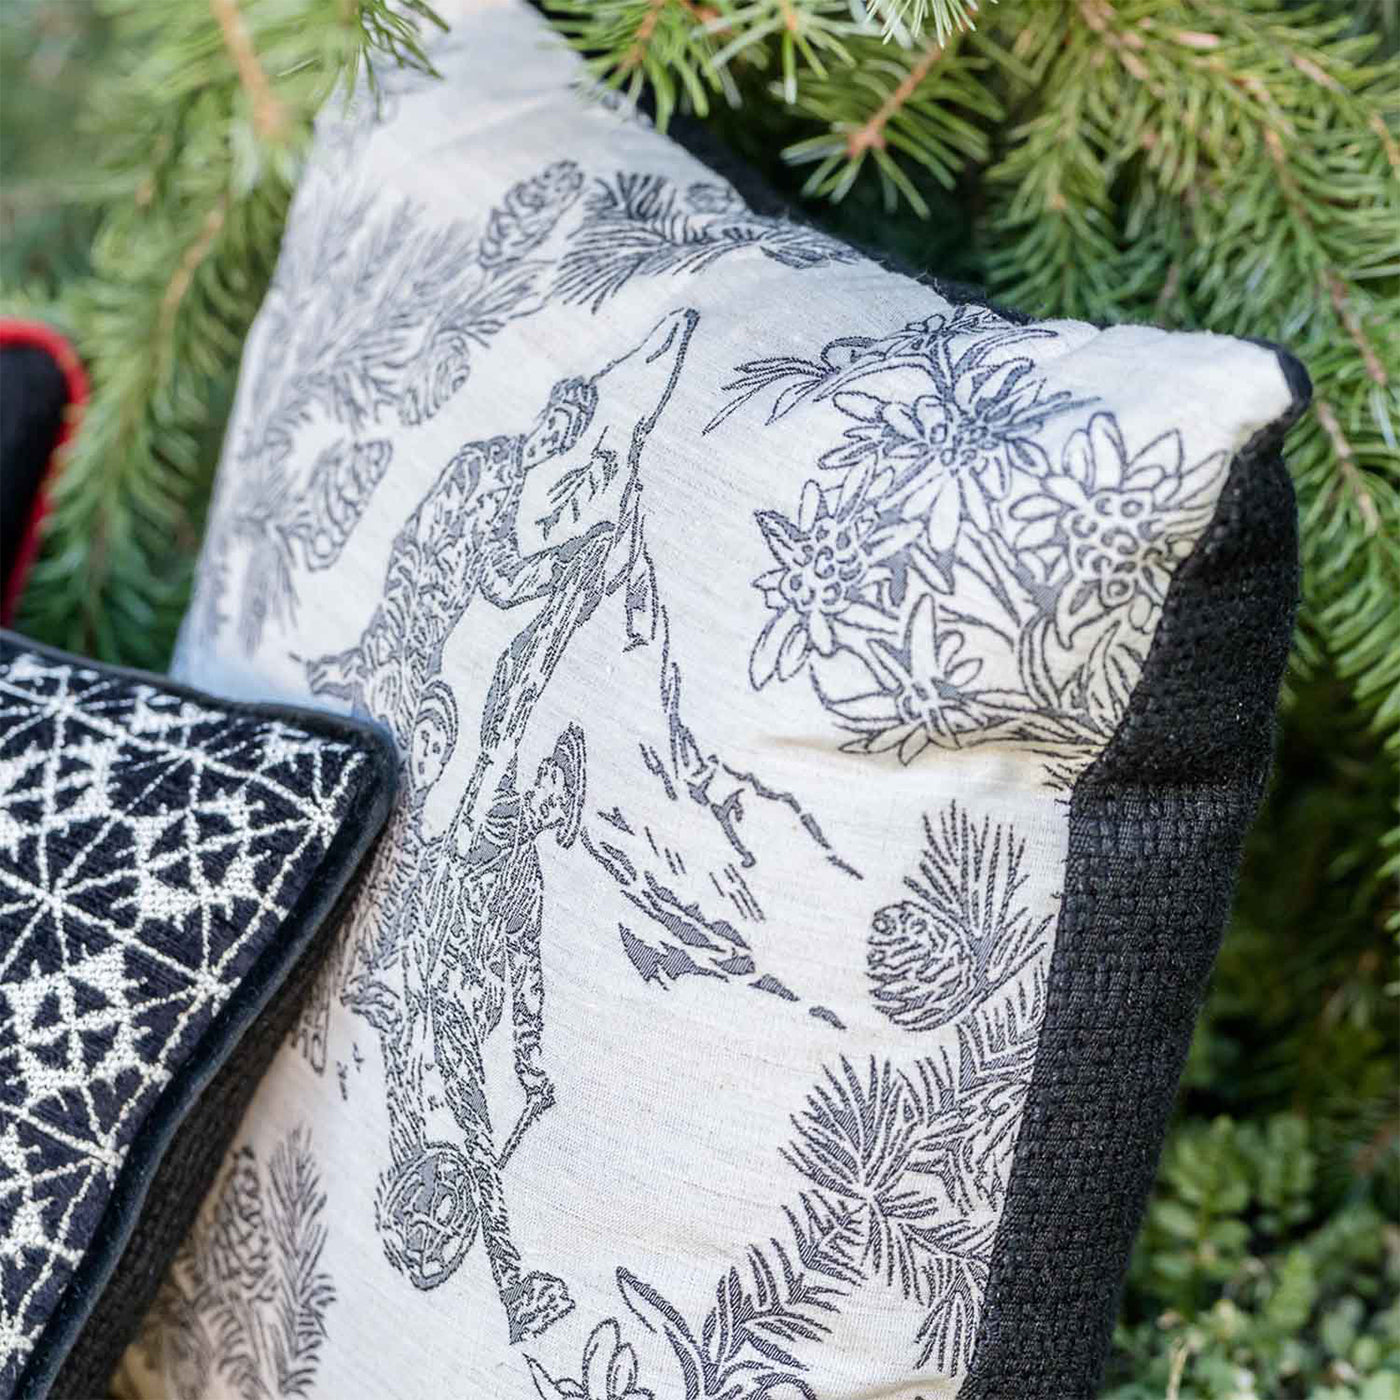 Black and White Carré Cushion in toile de jouy jacquard fabric - Alternative view 3